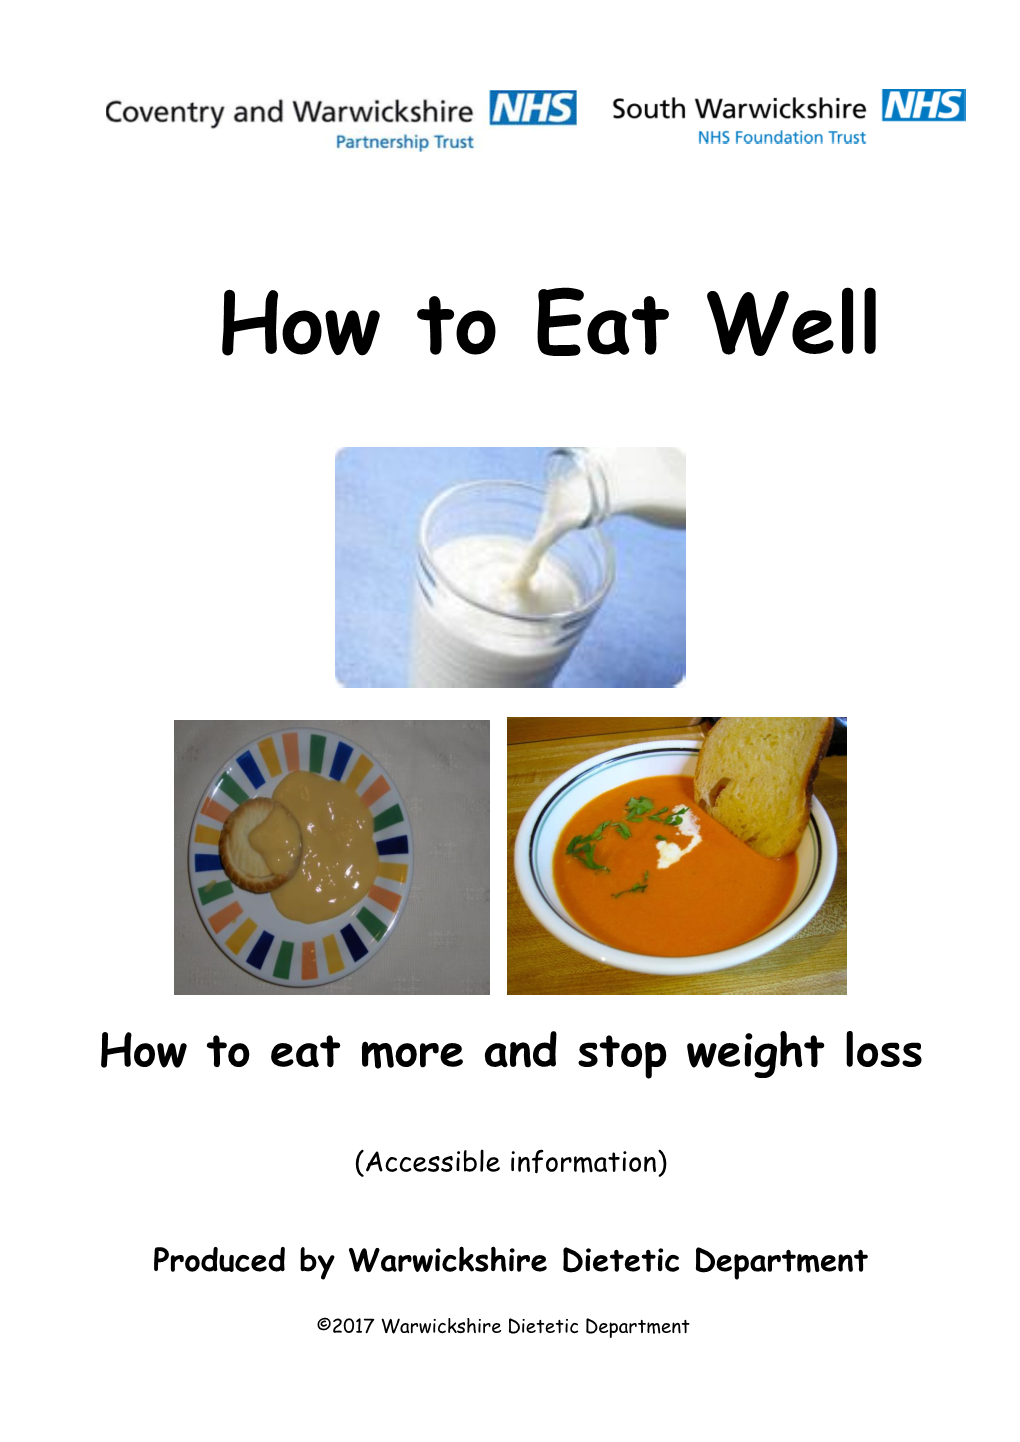 How to Eat Well